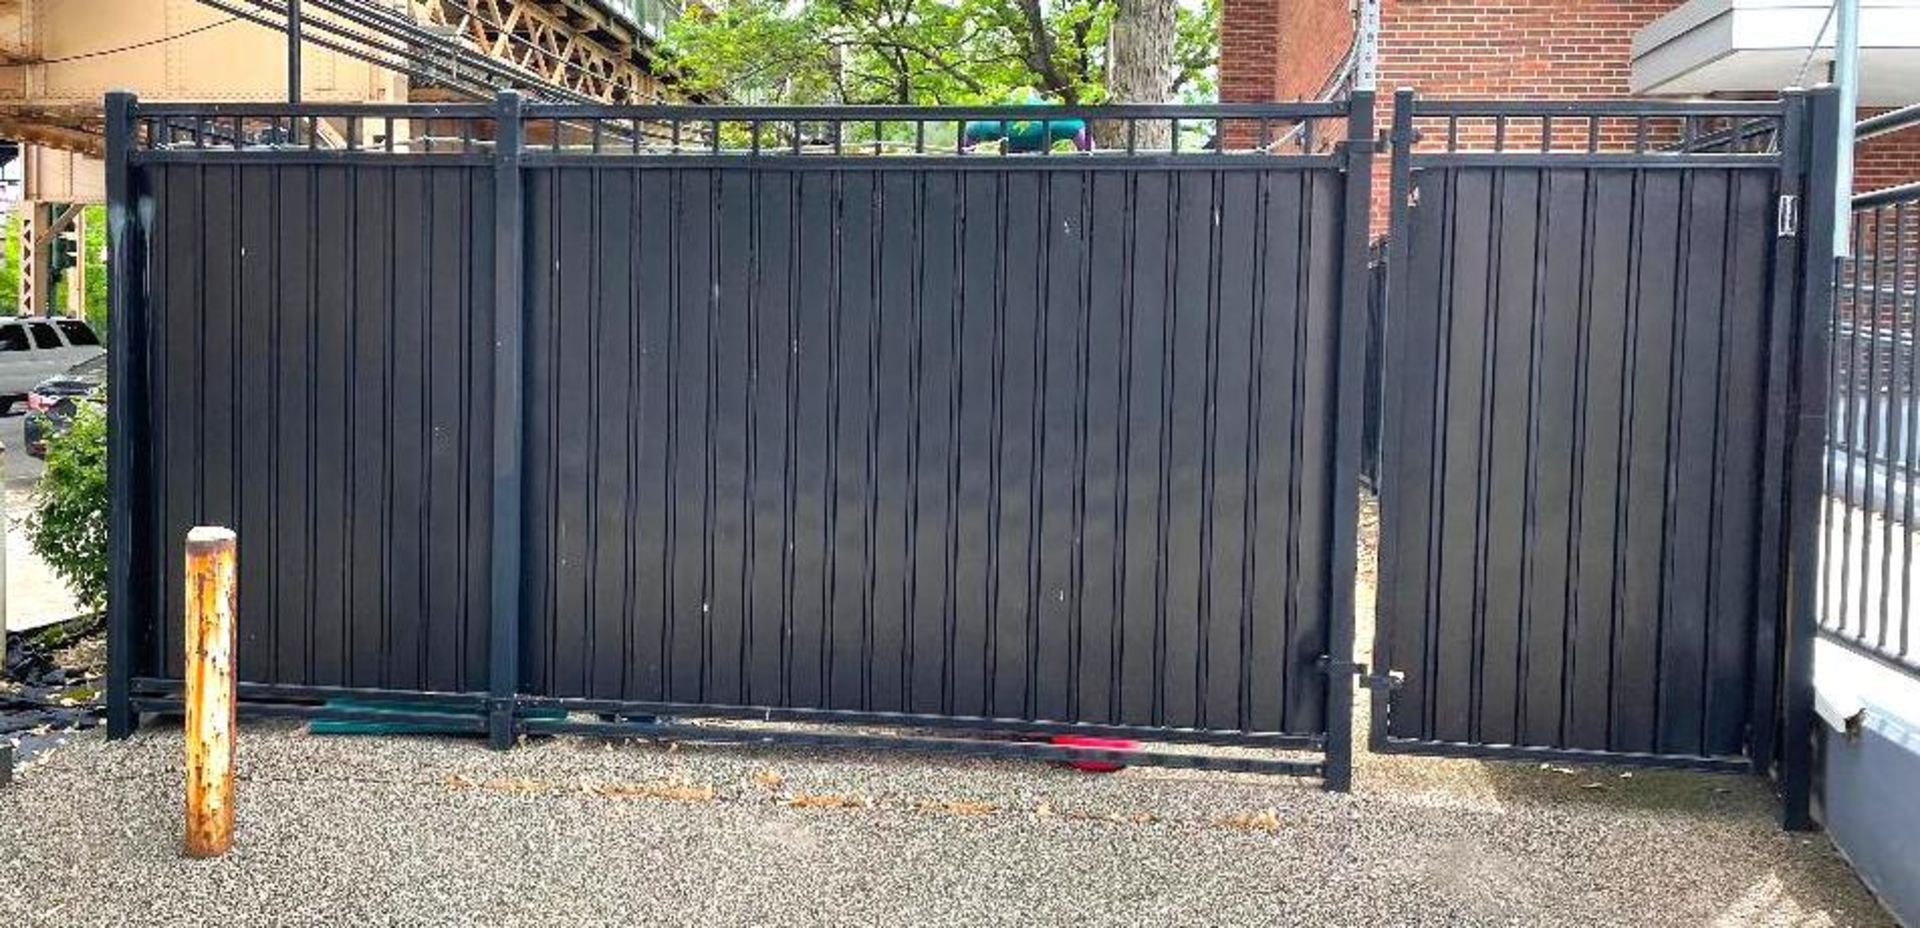 DESCRIPTION (22) 96" X 72" ALUMINUM PRIVACY GATE W/ (2) ENTRY GATE SECTIONS LOCATION PLAYGROUND THIS - Image 2 of 7